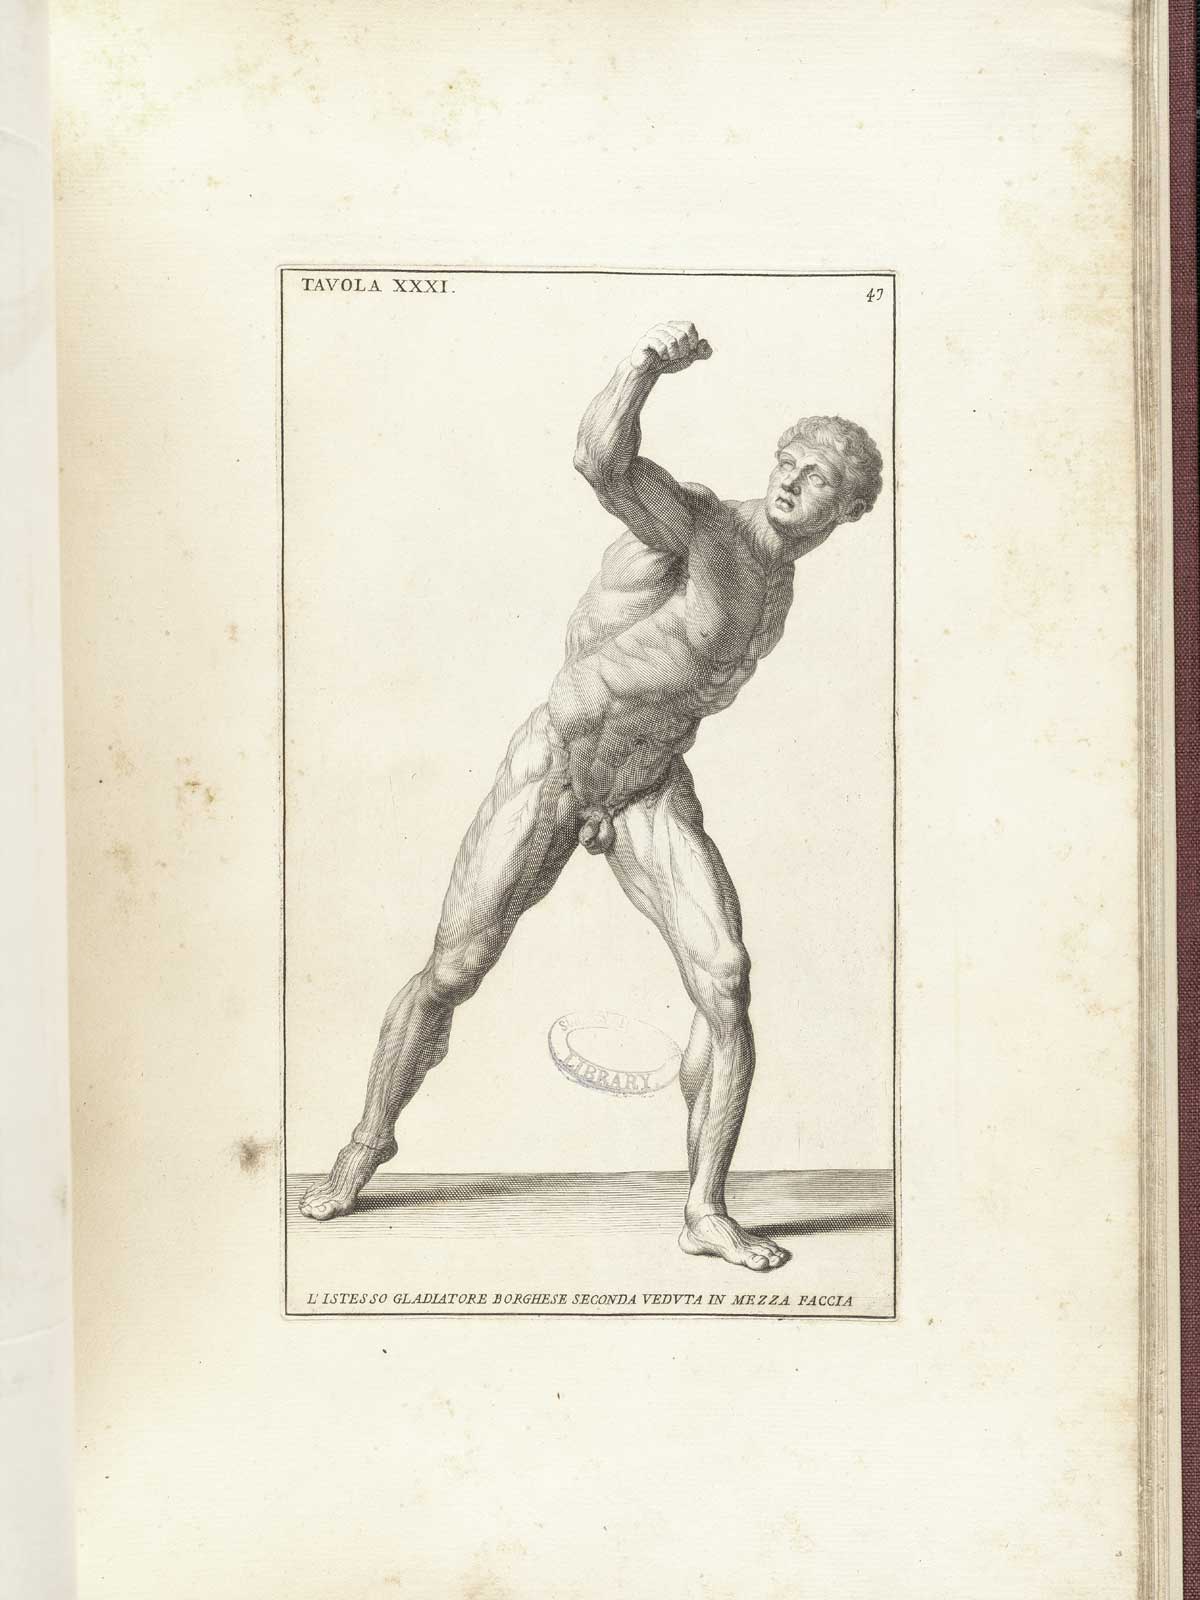 Engraving of the statue the Borghese Gladiator, a facing nude male figure lunging forward with his right hand raised as if with a sword to fight an opponent on horseback; from Bernardino Genga’s Anatomia per uso et intelligenza del disegno, NLM Call no.: WZ 250 G329an 1691.